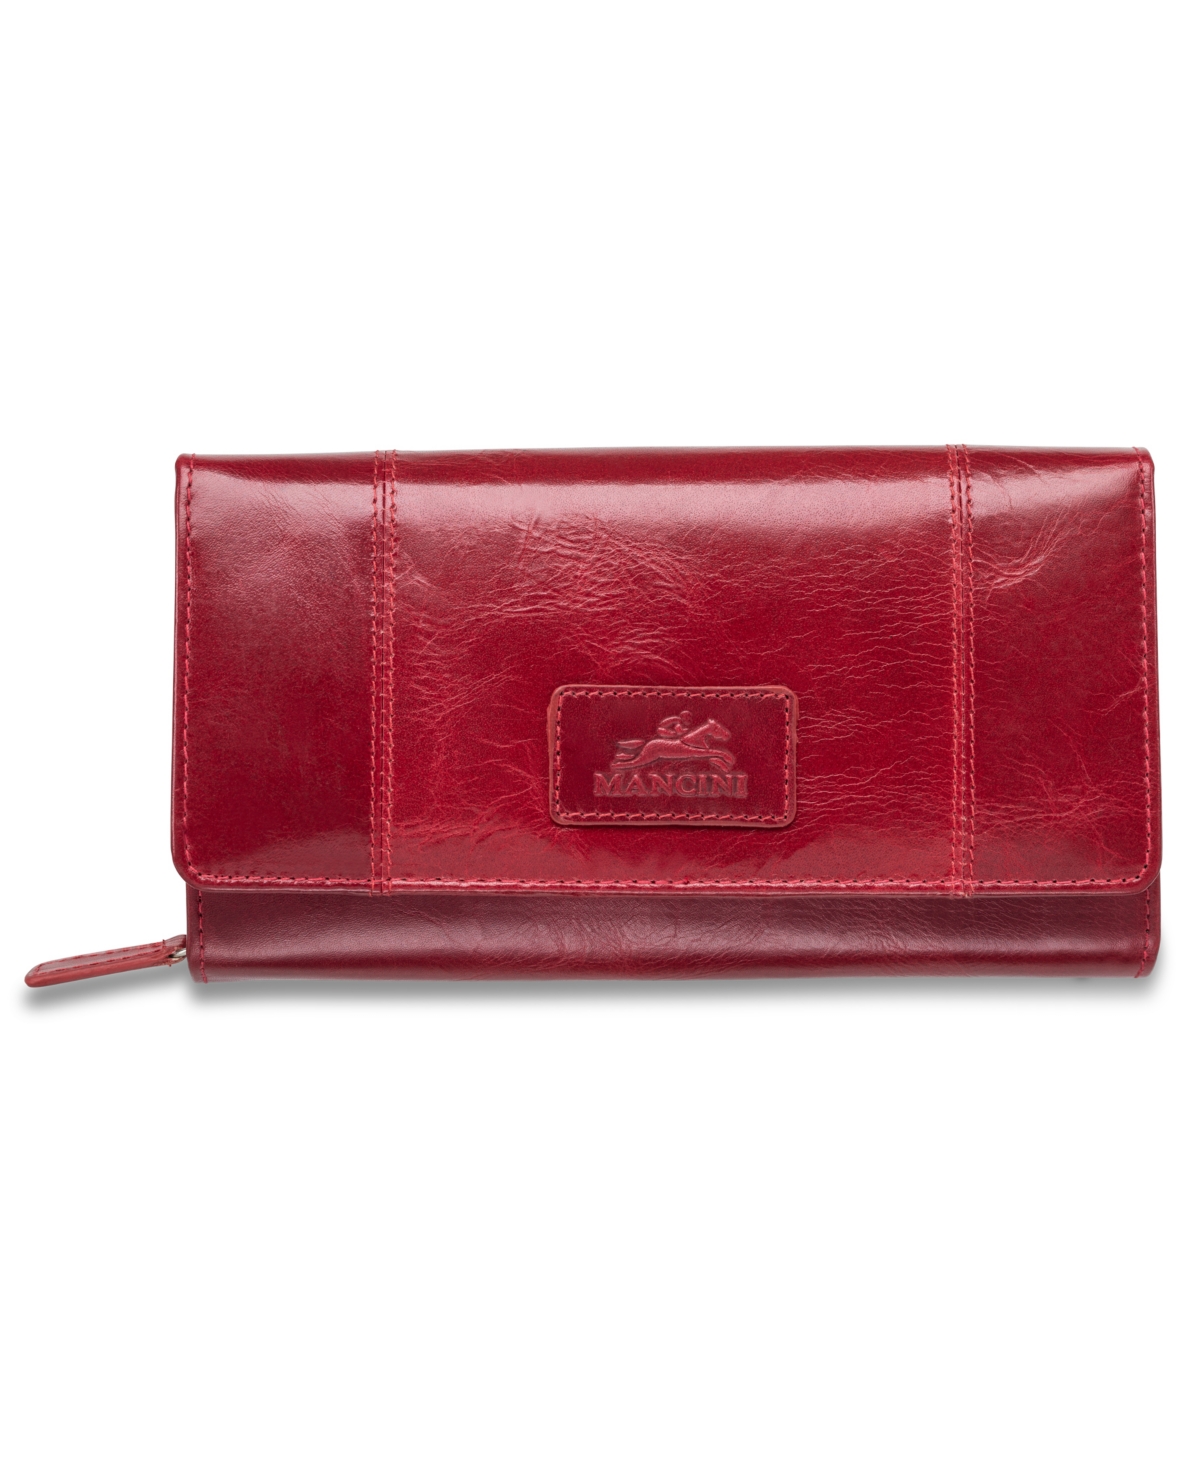 Casablanca Collection Rfid Secure Ladies Clutch Wallet - Red